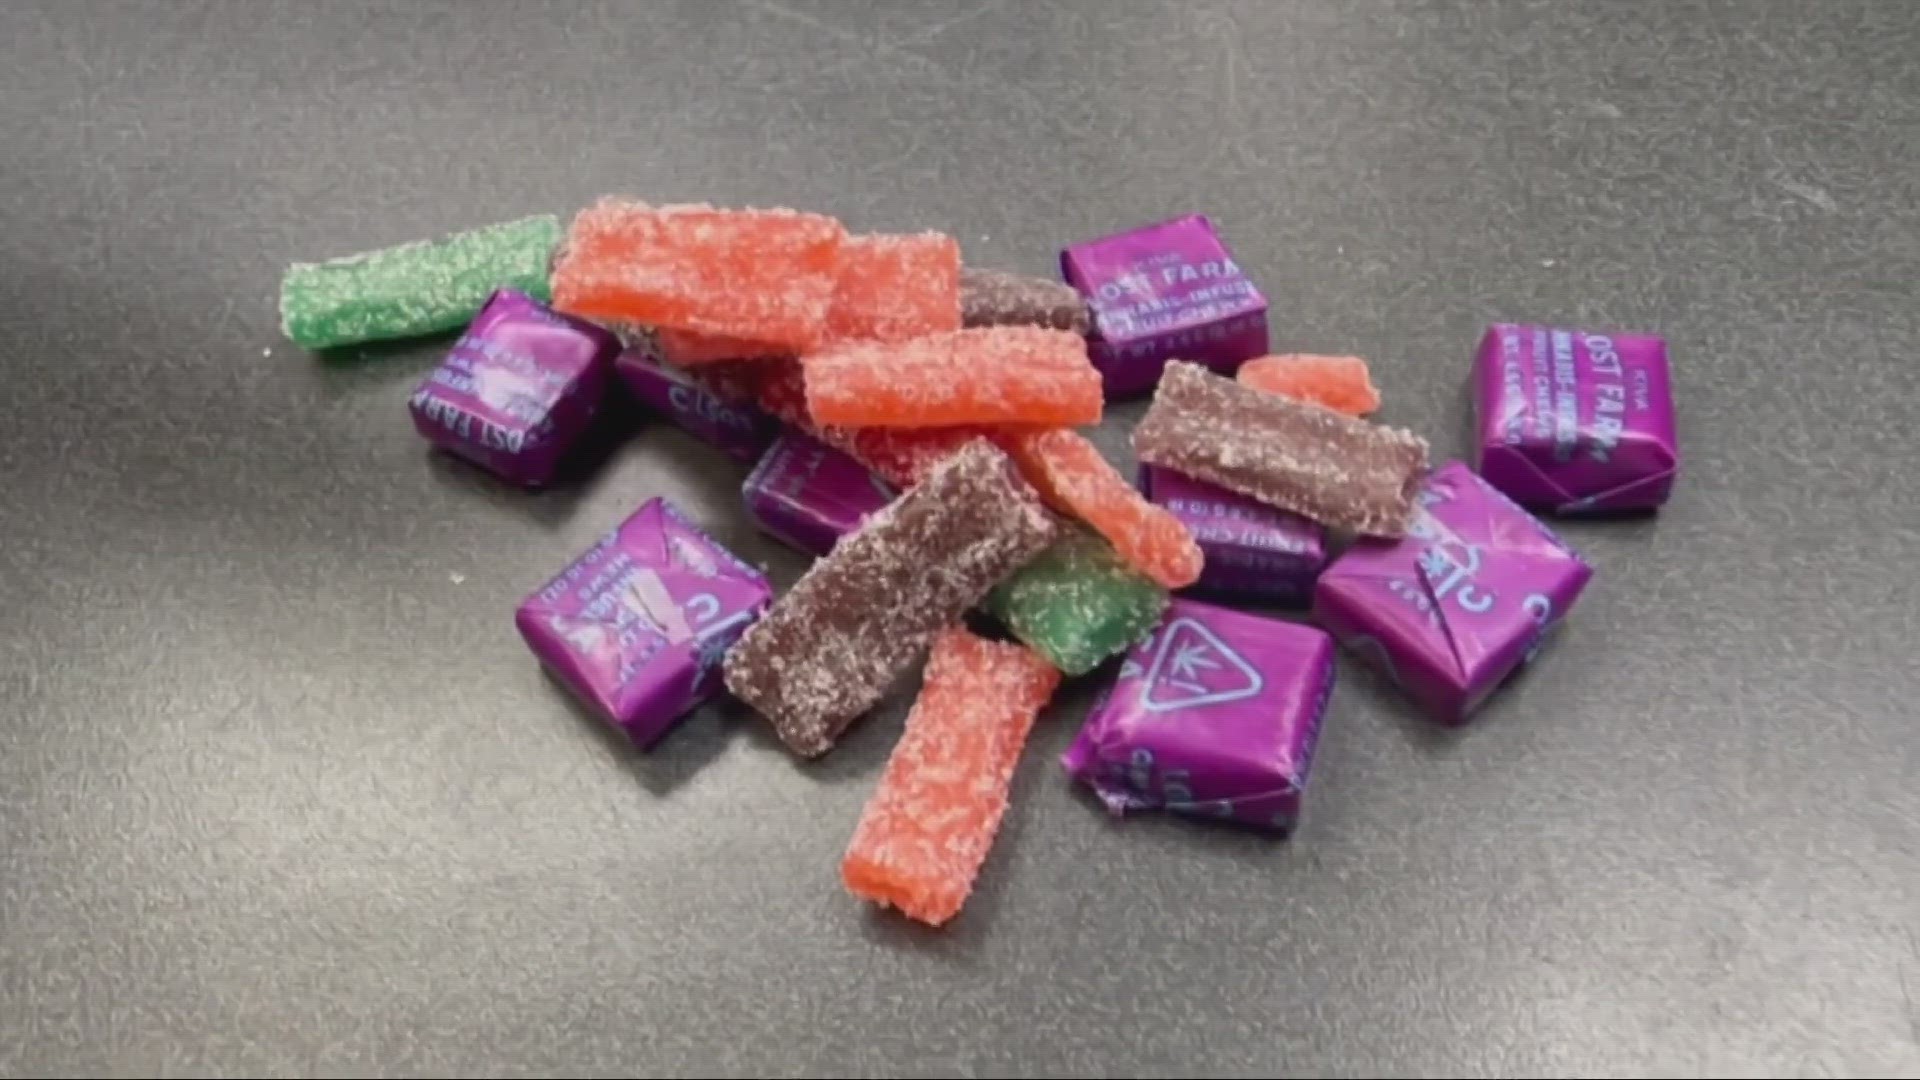 There's been a significant rise in recent years of children eating marijuana edibles, thinking they are candy. Doctors say too much can be dangerous.